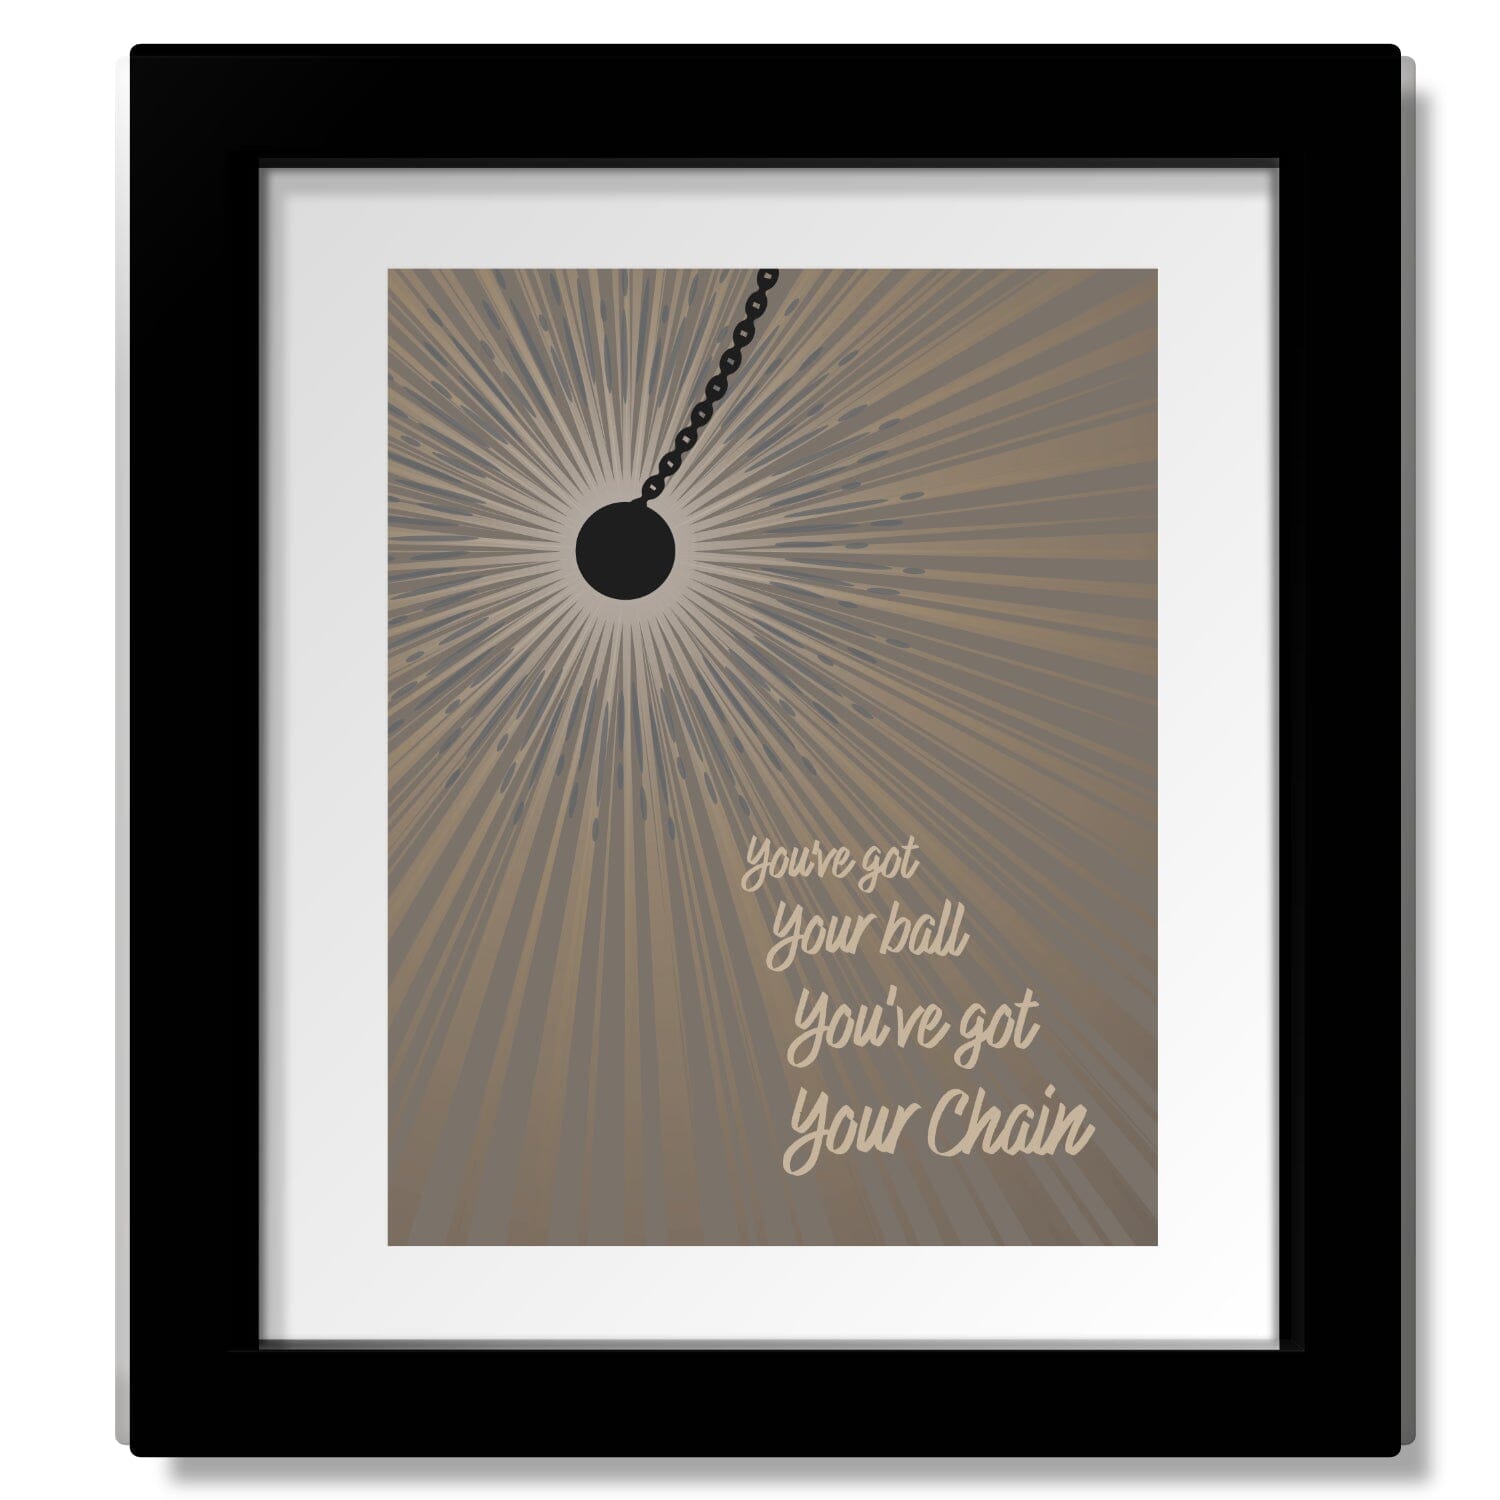 Crash into Me by Dave Matthews Band - Song Lyric Print Art Song Lyrics Art Song Lyrics Art 8x10 Matted and Framed Print 